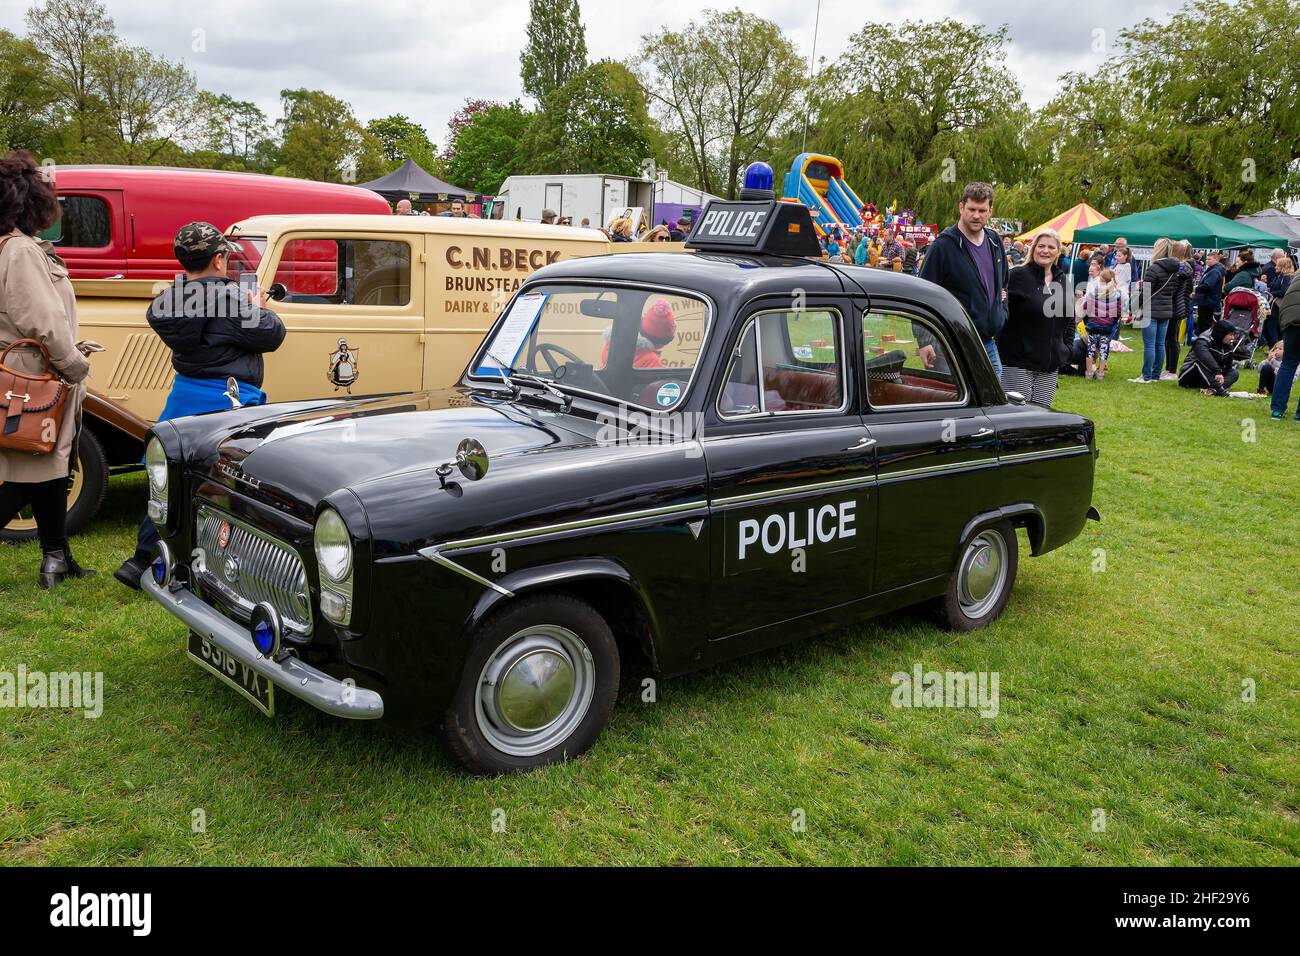 Culcheth Community Day, Cheshire, 2019 where stalls circled a collection of vintage vehicles restored by enthusiasts and viewed by the public Stock Photo